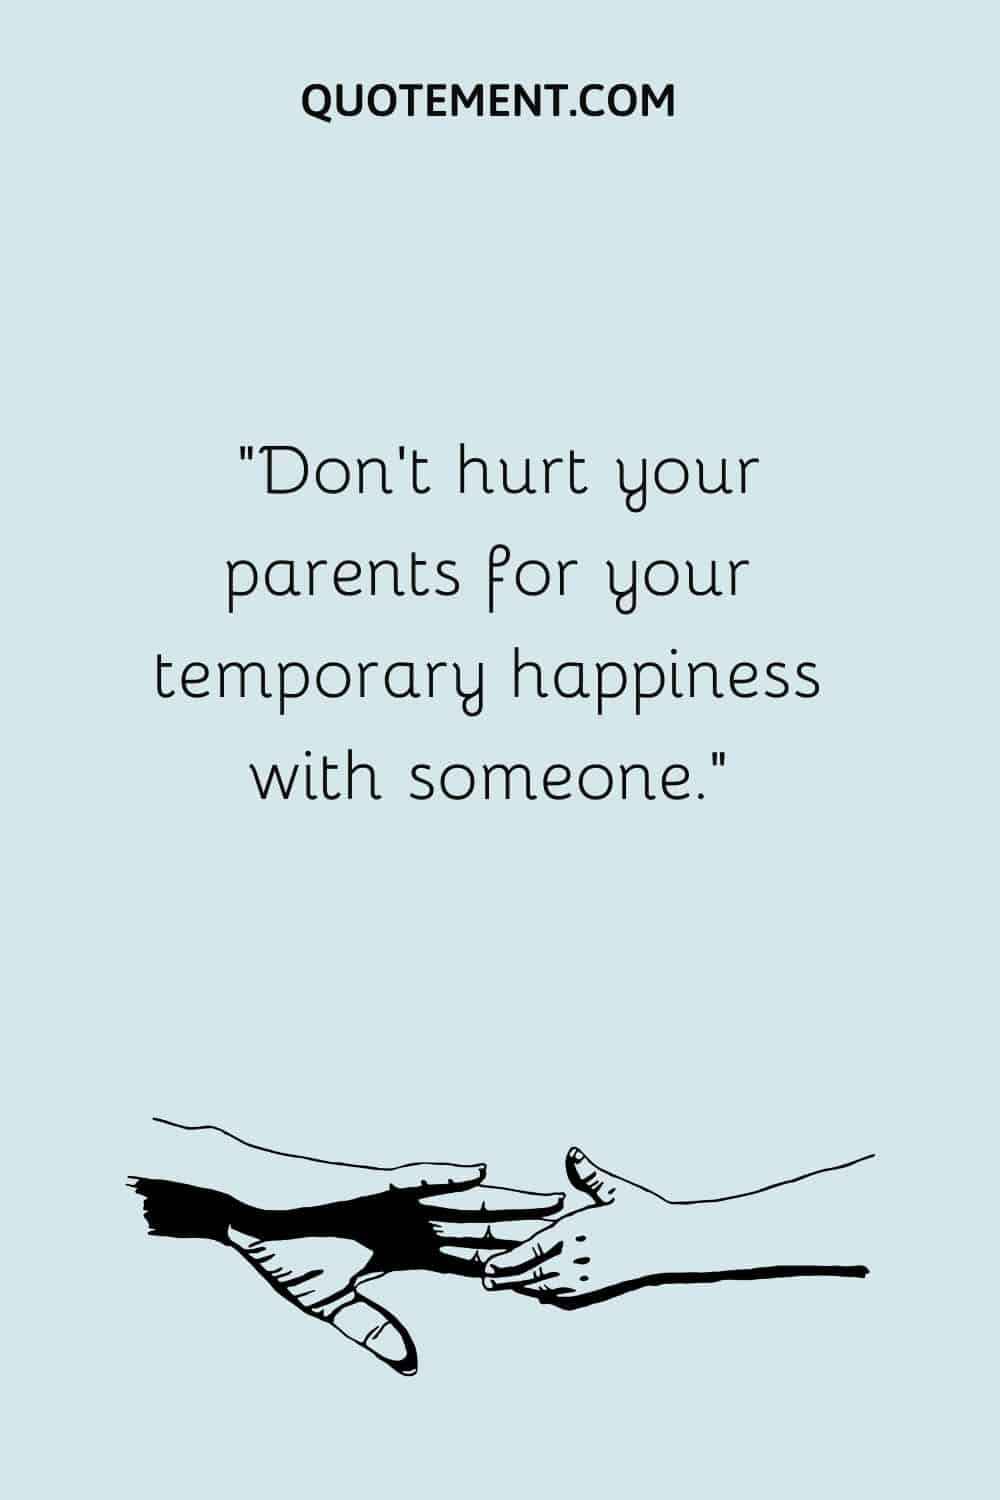 Don’t hurt your parents for your temporary happiness with someone